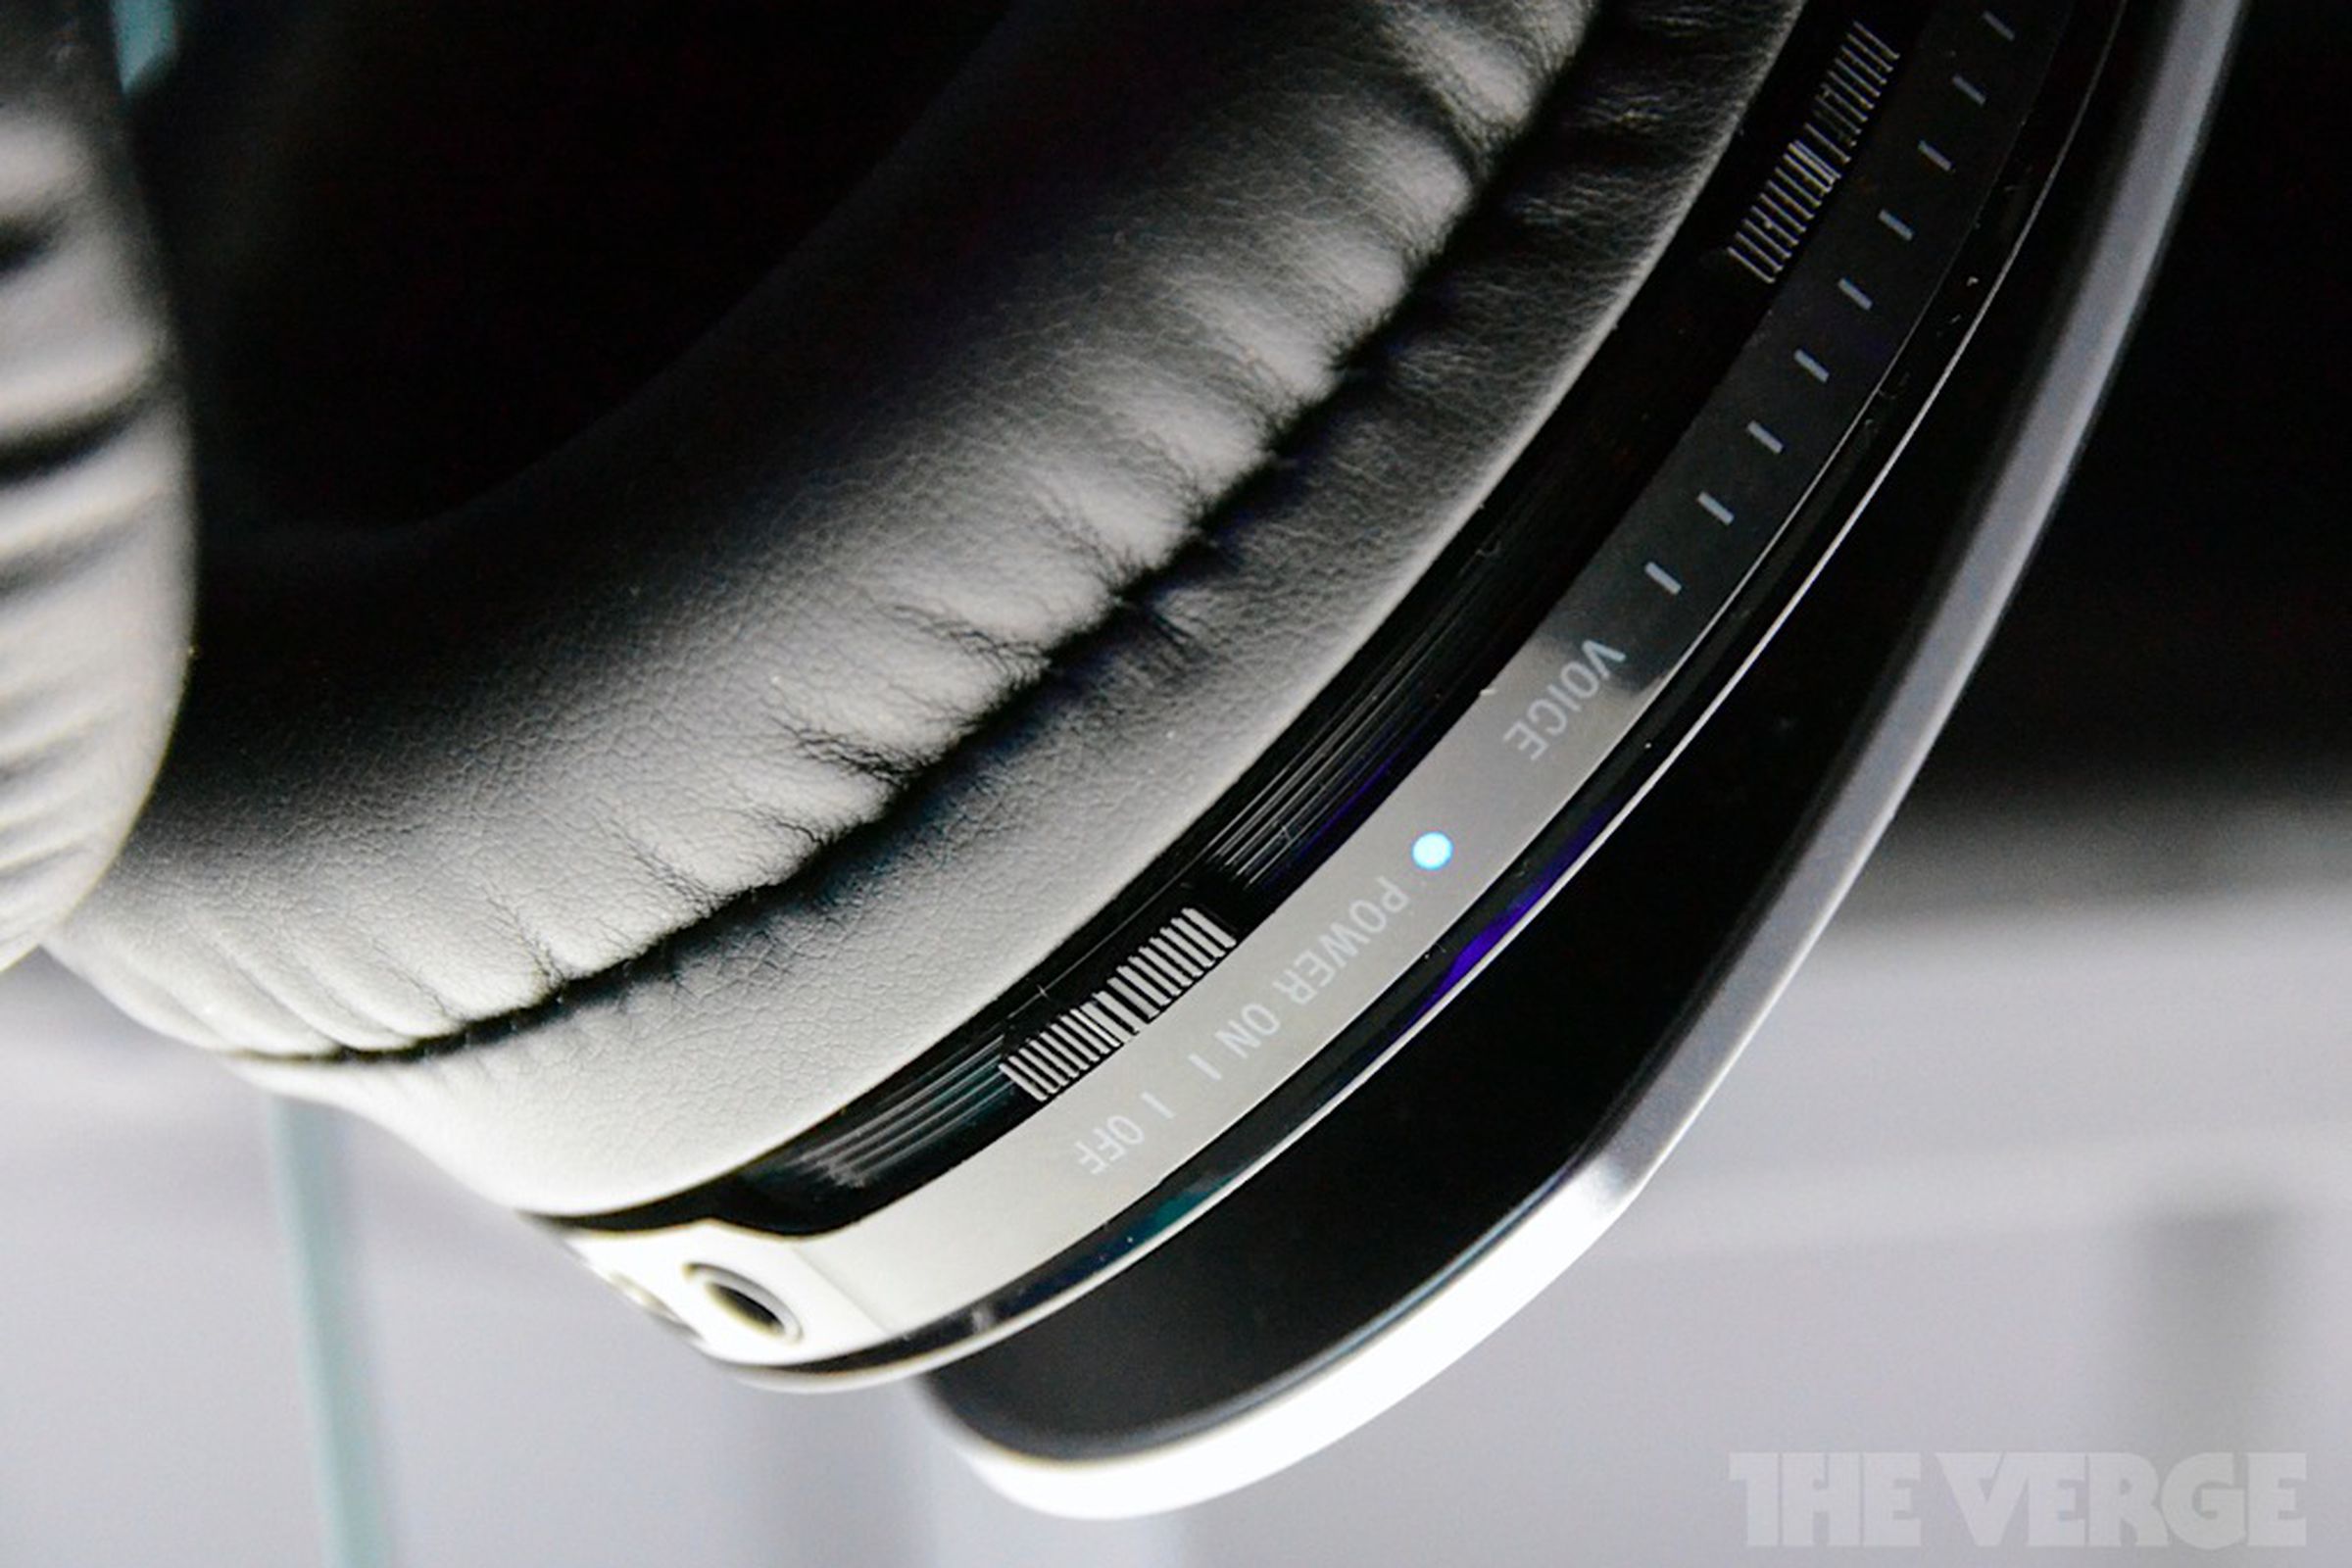 Gallery Photo: Sony Pulse Wireless Stereo Headset Elite Edition hands-on impressions